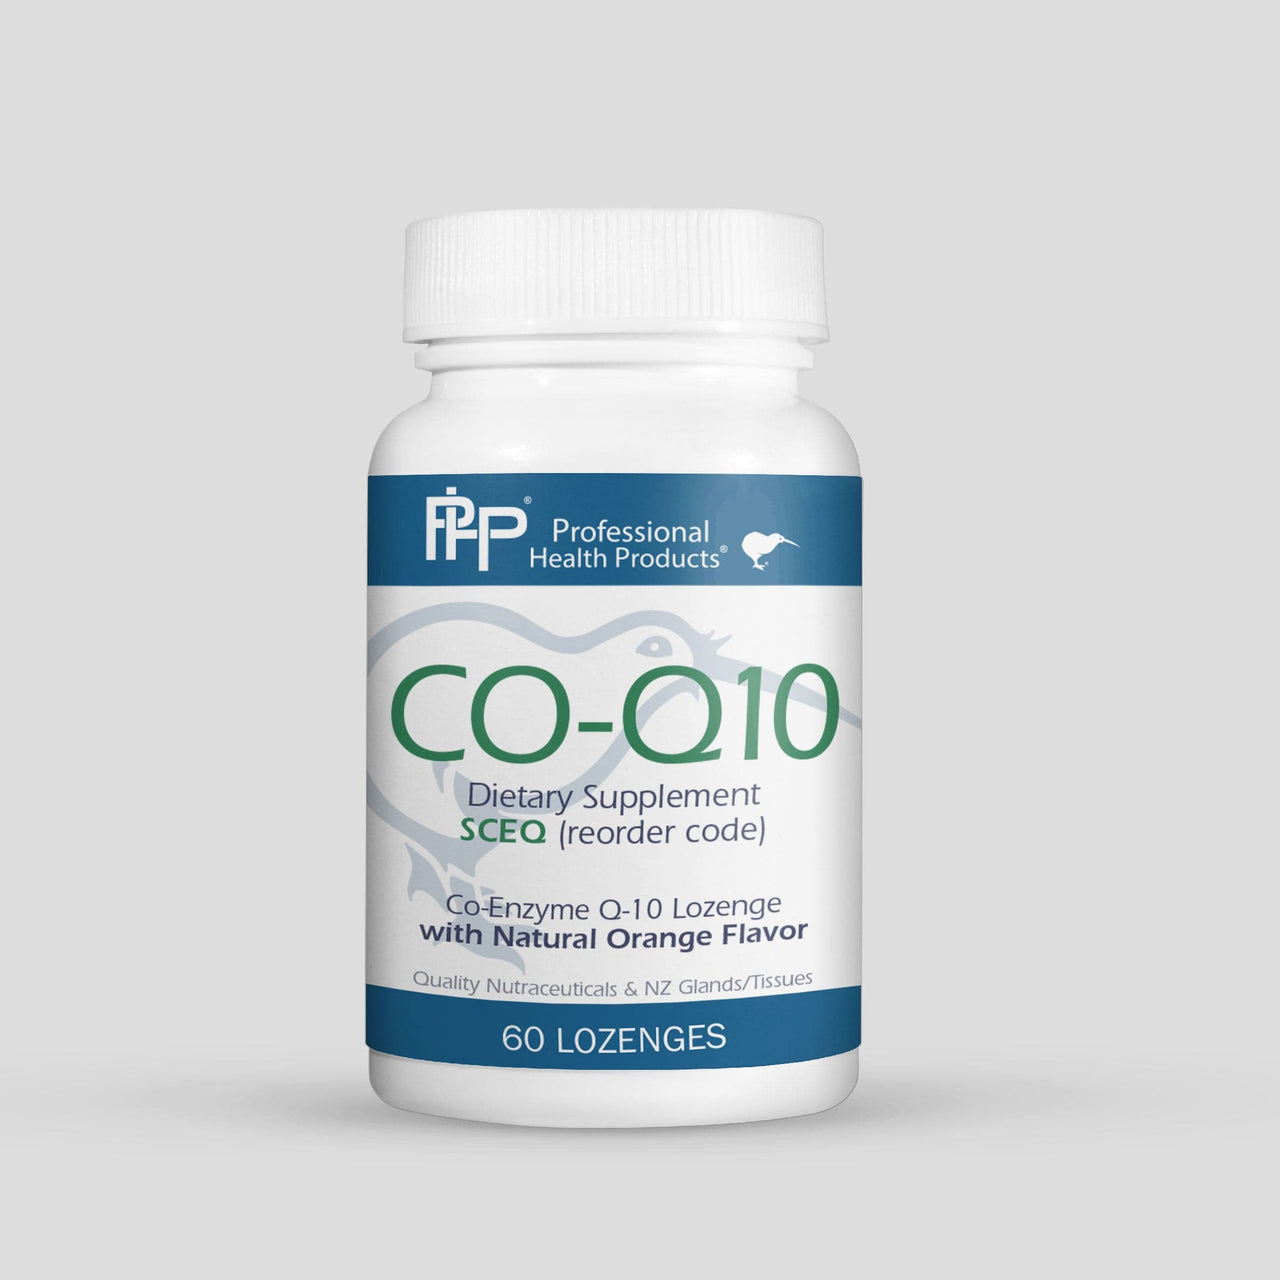 CoQ10 Chewable * Prof Health Products Supplement - Conners Clinic